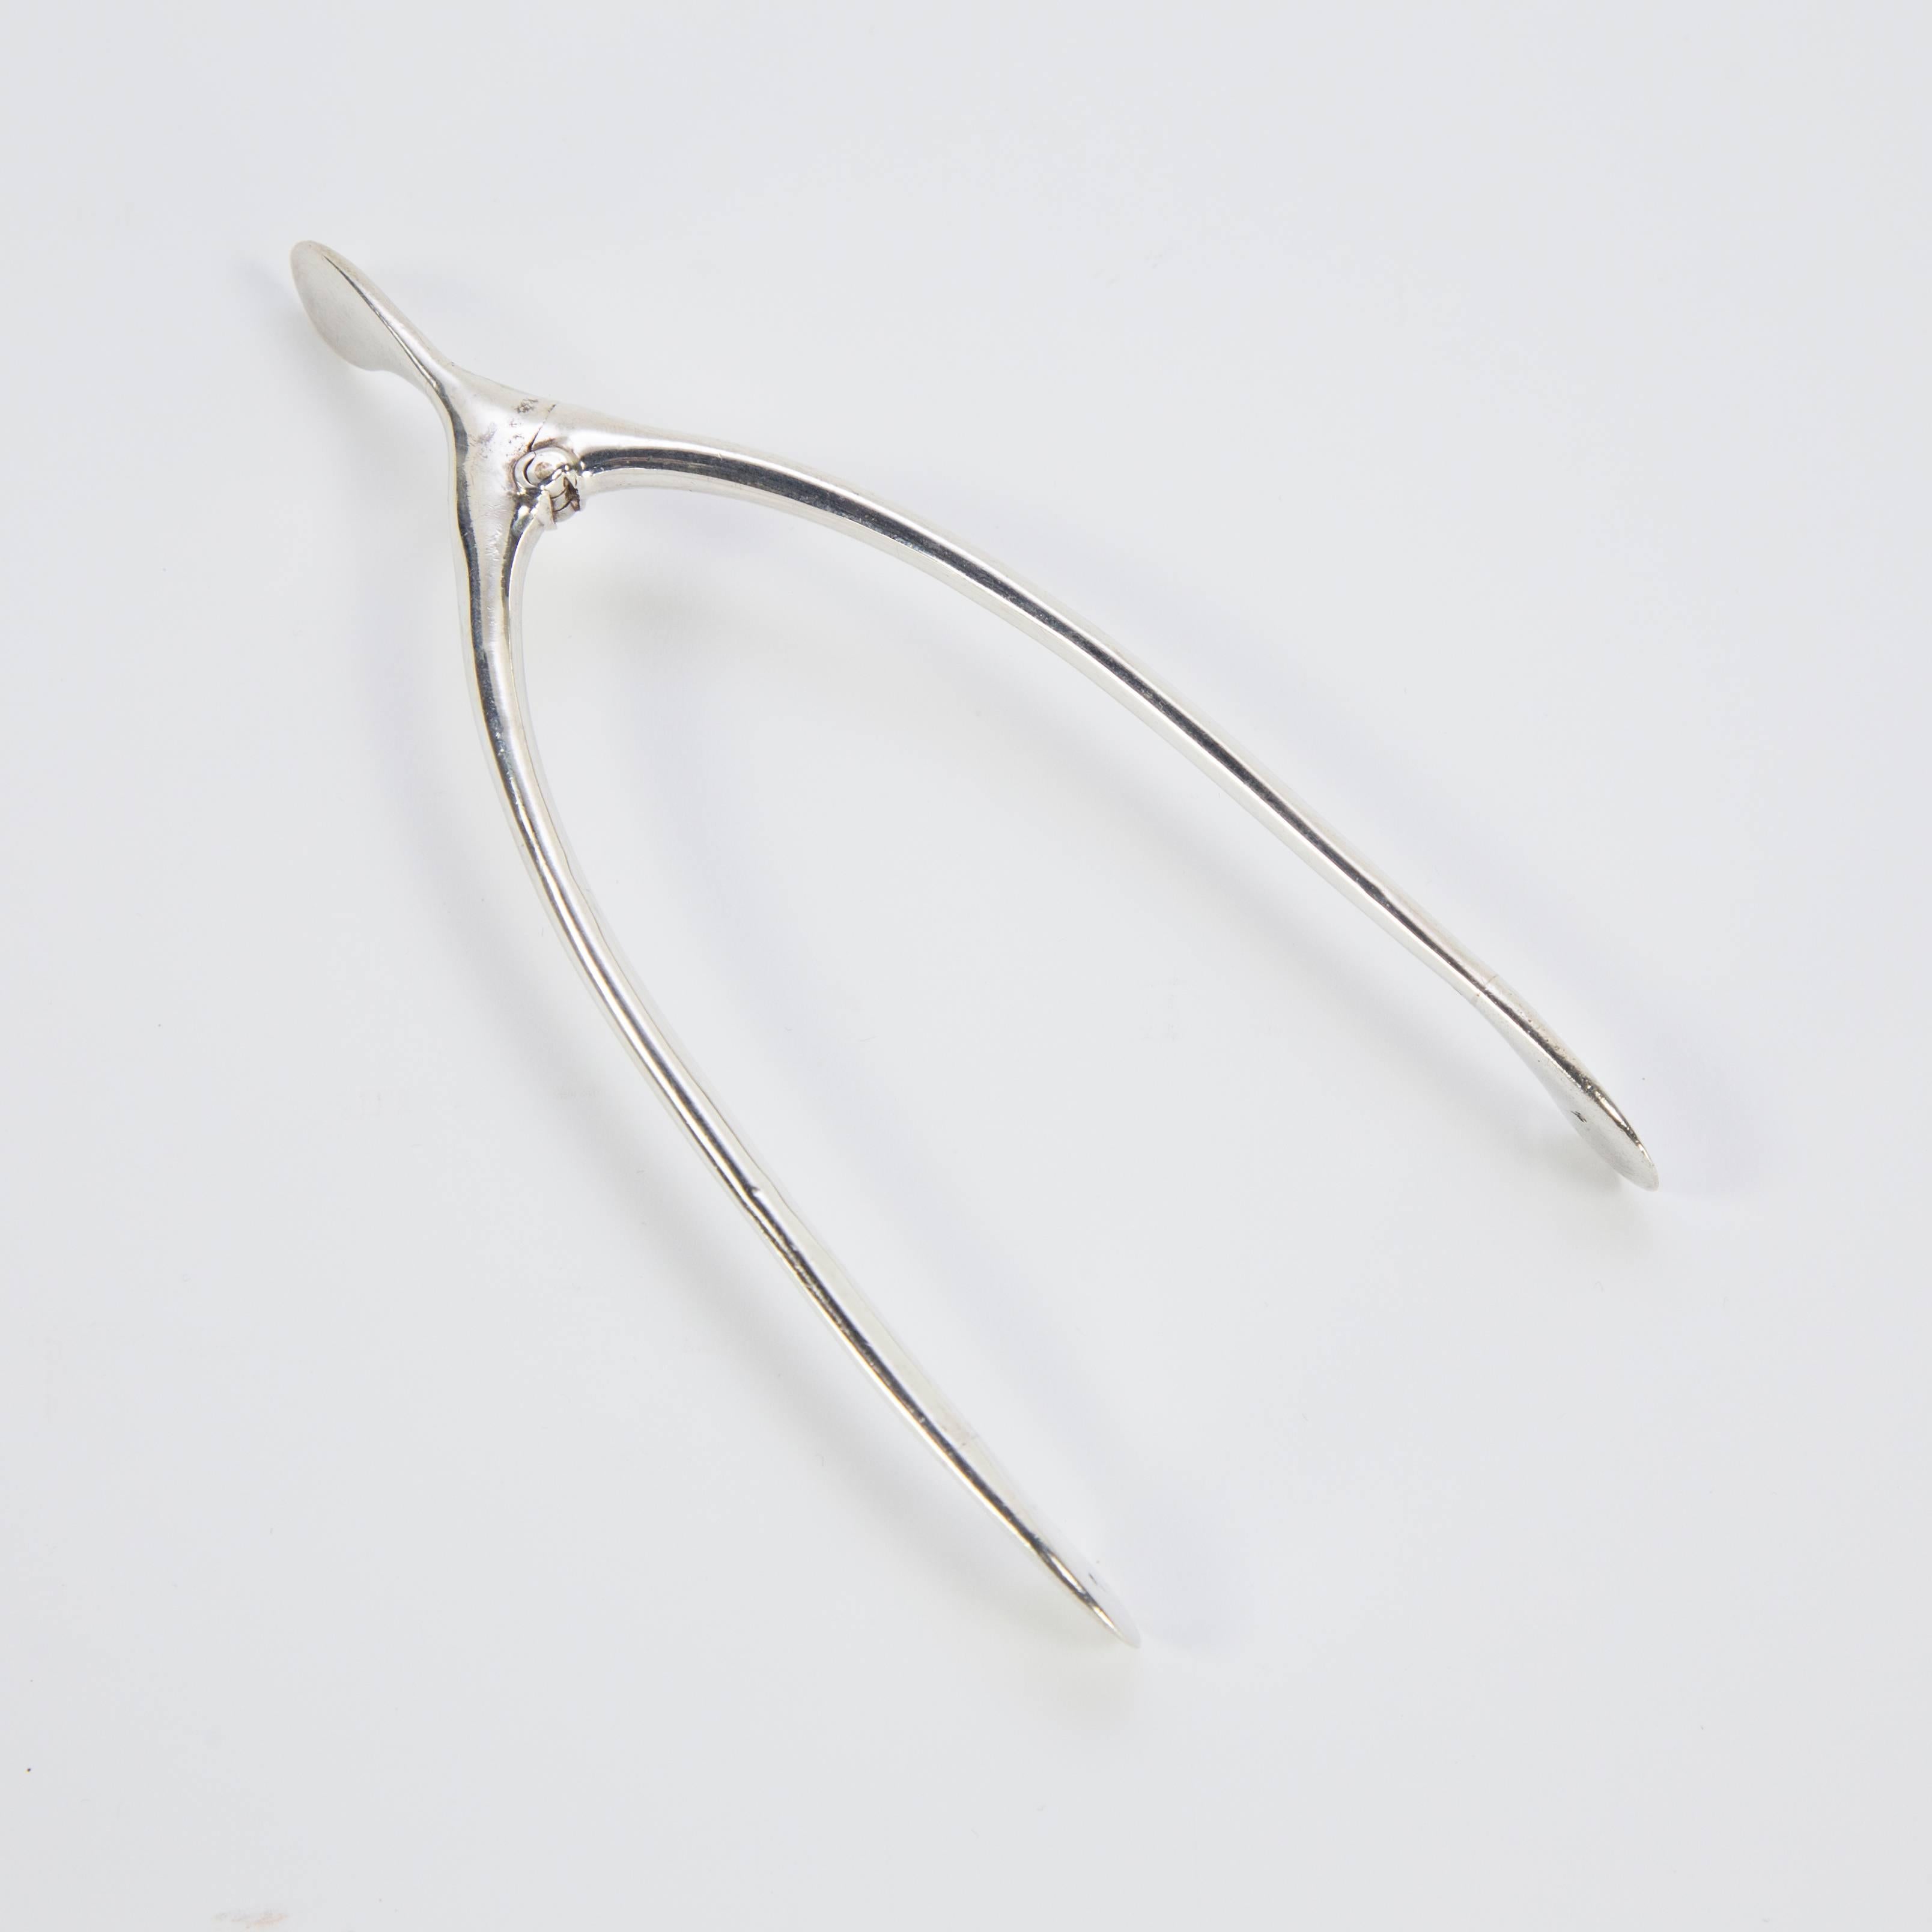 Pair of sterling silver sugar cube tongs in the shape of a wishbone! Fully hallmarked with Birmingham hallmark, letter date corresponds to 1907. Tongs measure approximate 5.5